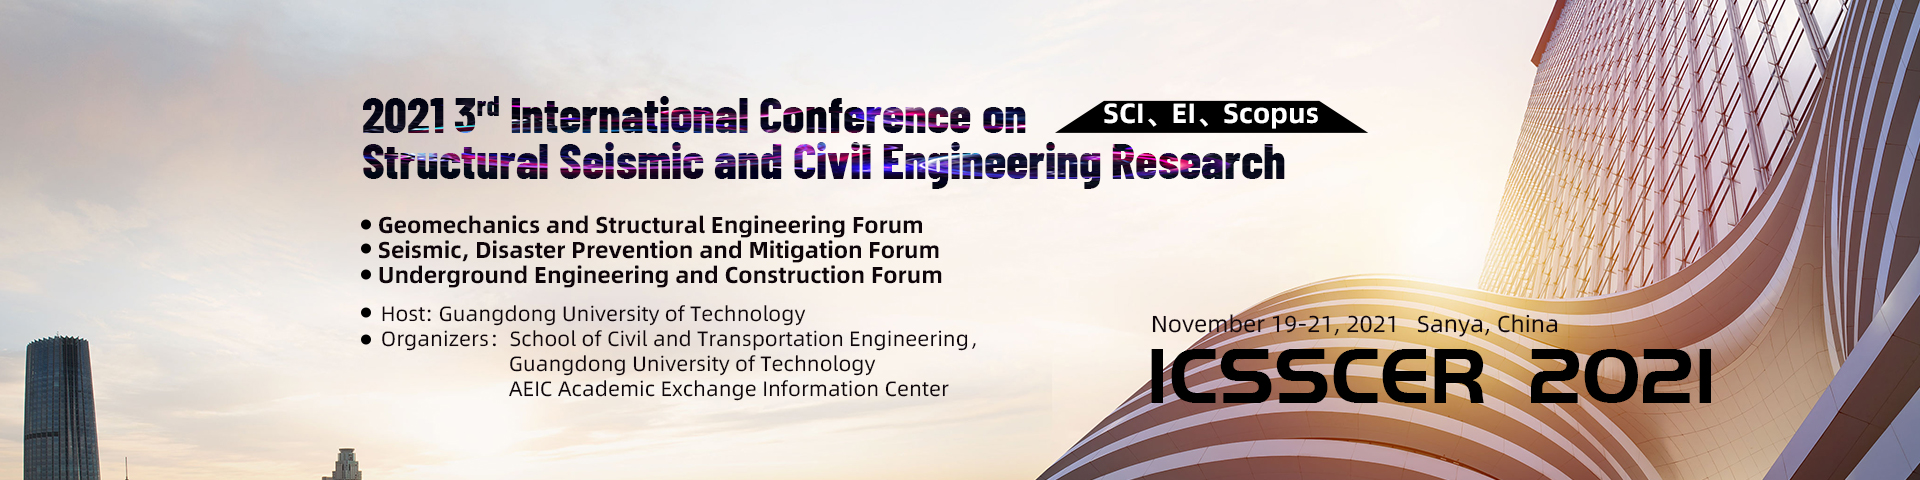 SCI Conference - 2021 3rd International Conference on Structural Seismic and Civil Engineering Research (ICSSCER 2021), Sanya, Hainan, China